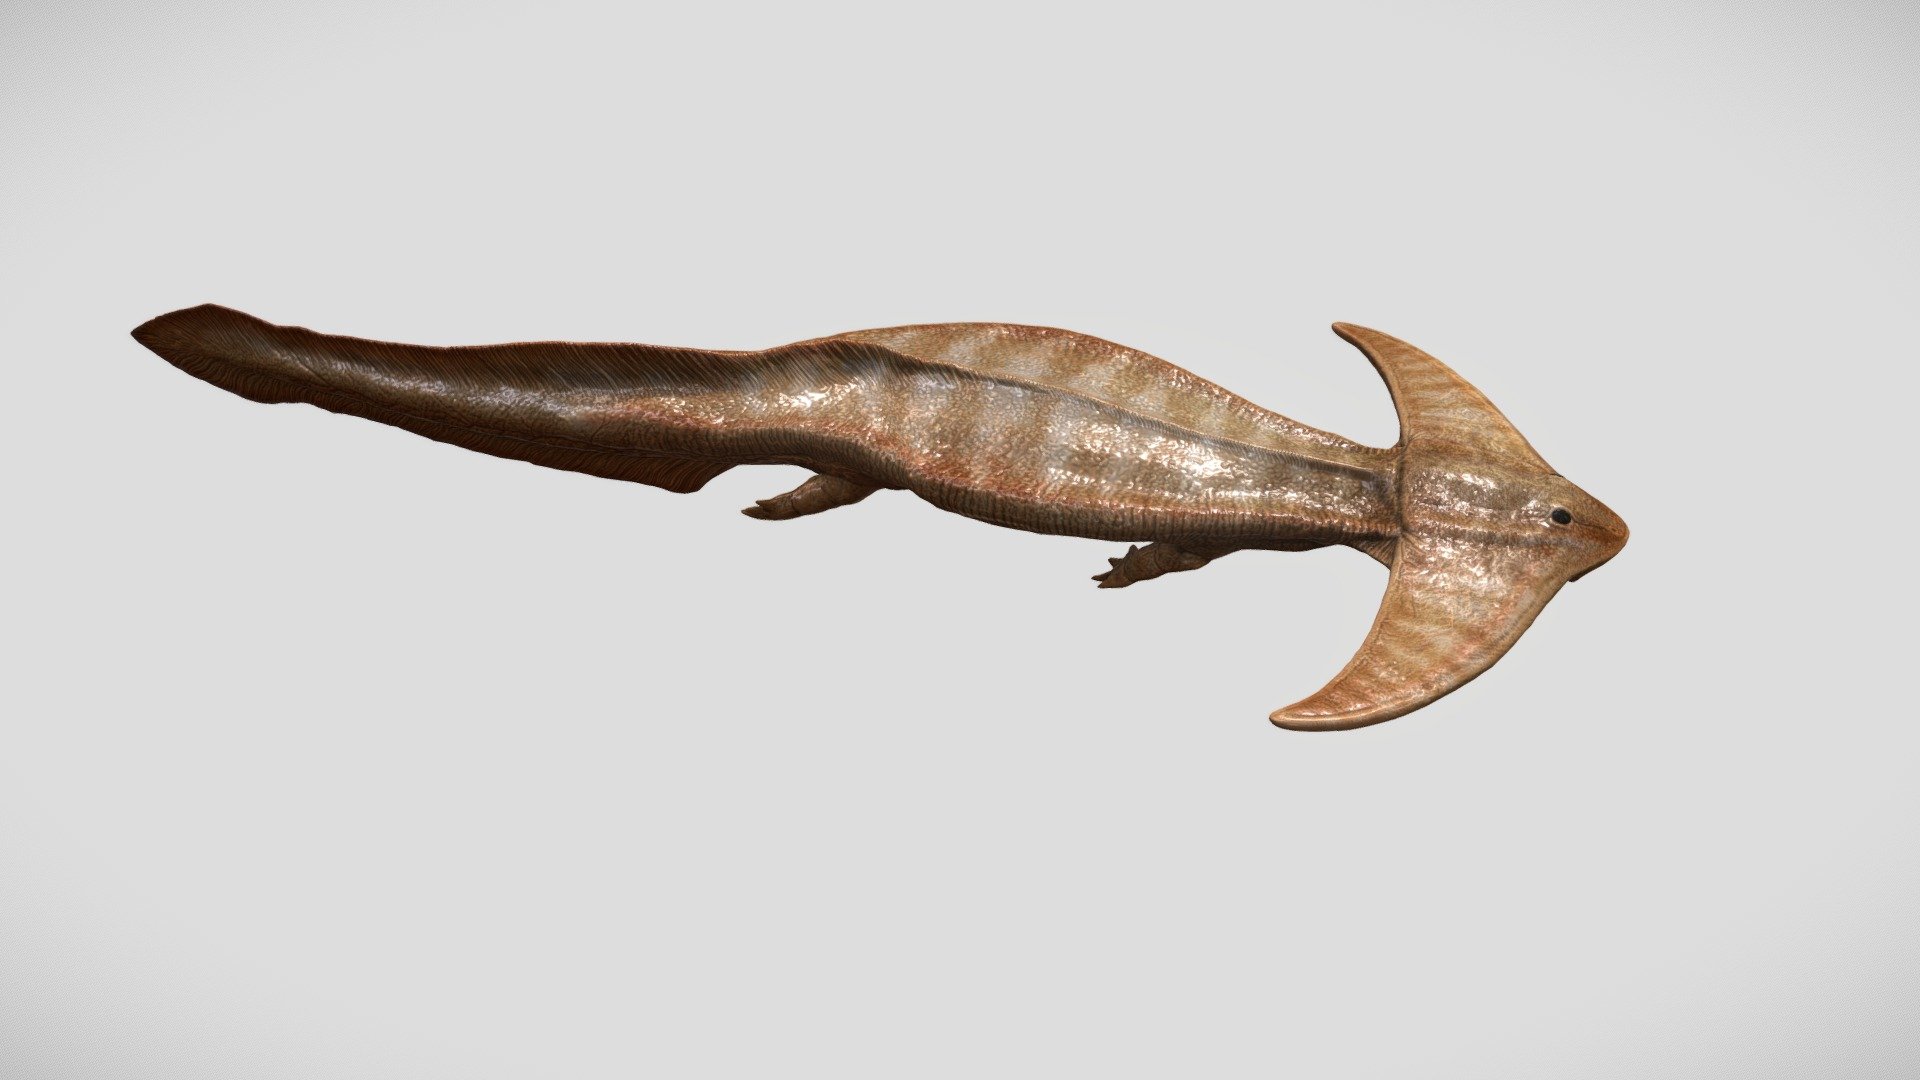 The diplocaulus is a extinct genus of lepospondyli that lived during the carboniferous. It probably lived in swamp-like niches

It was about 90-100 cm long (maximum lenght)

Additional files in zip folder:  





6 alternative color textures to add some own creativity.




fbx




ZBrush tool highpoly




obj




stl 3d print format (99.8cm)



Model and animation by Rick Stikkelorum 3d model